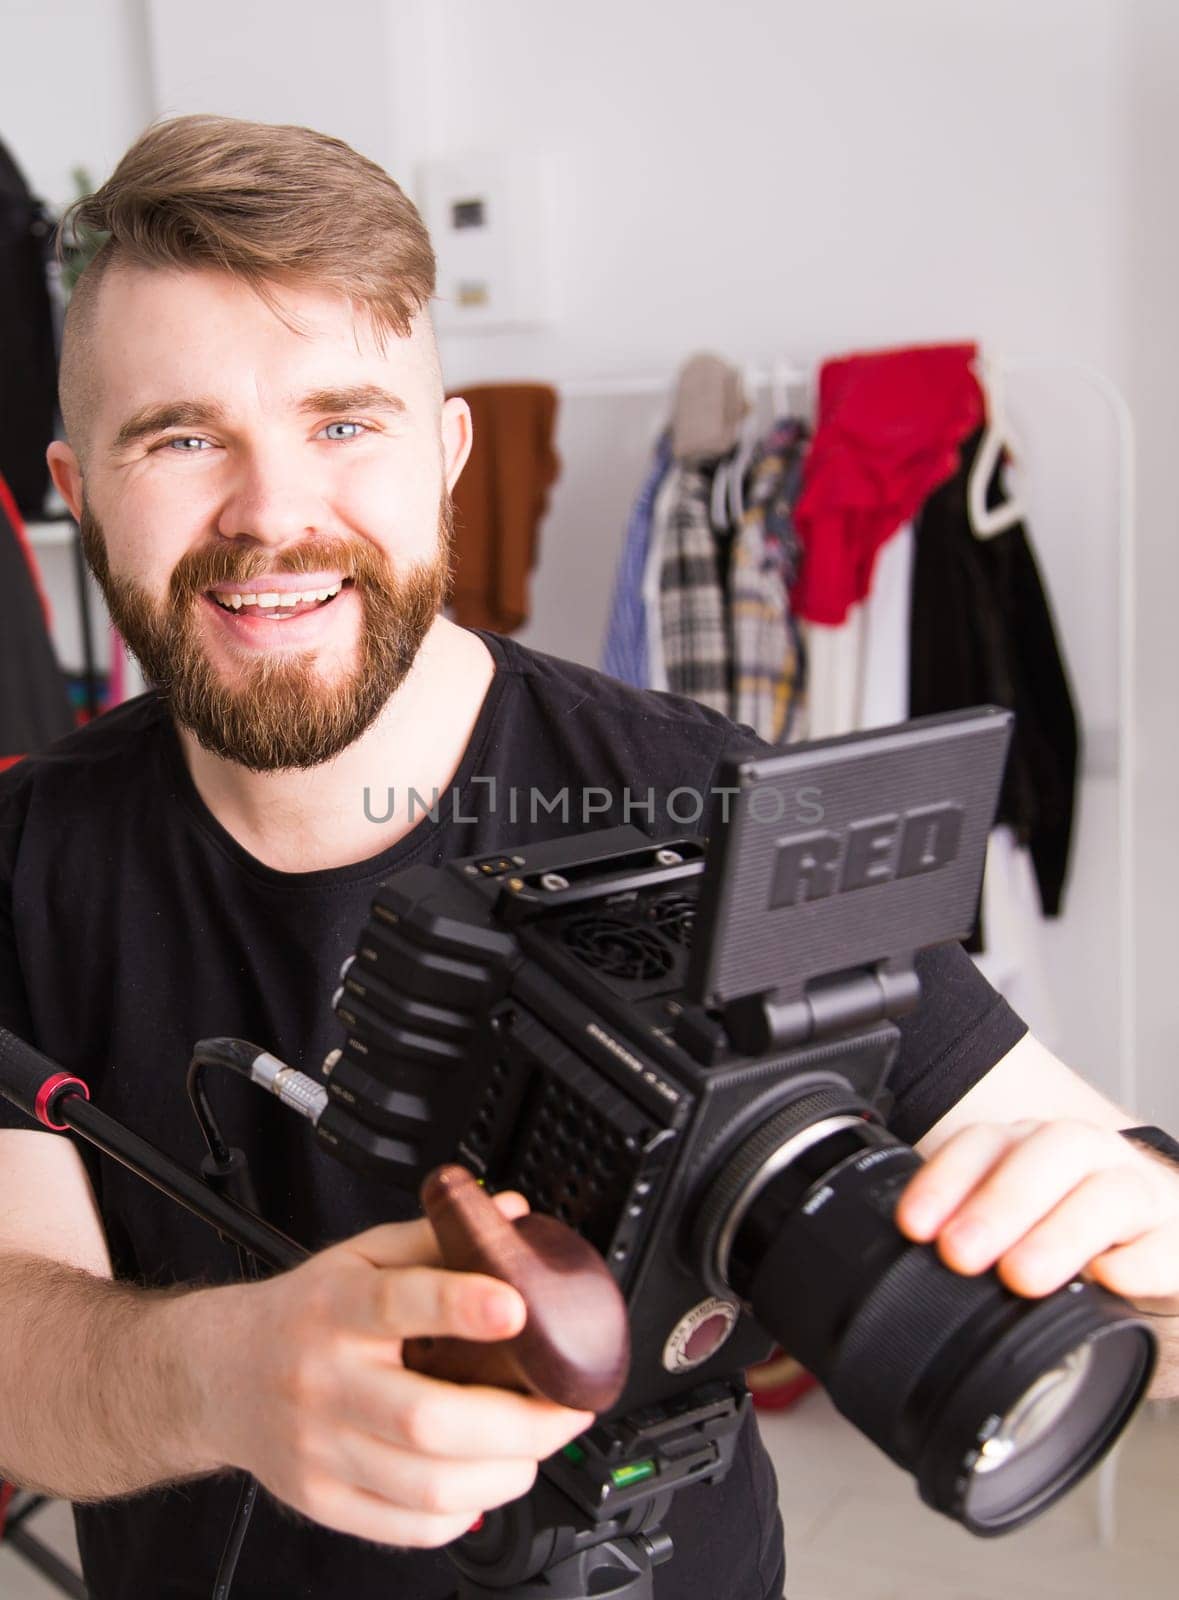 UFA, RUSSIA - 29 FEBRUARY 2020: cameraman works with Red digital cinema cameras. RED is the leading manufacturer of professional digital cinema cameras.